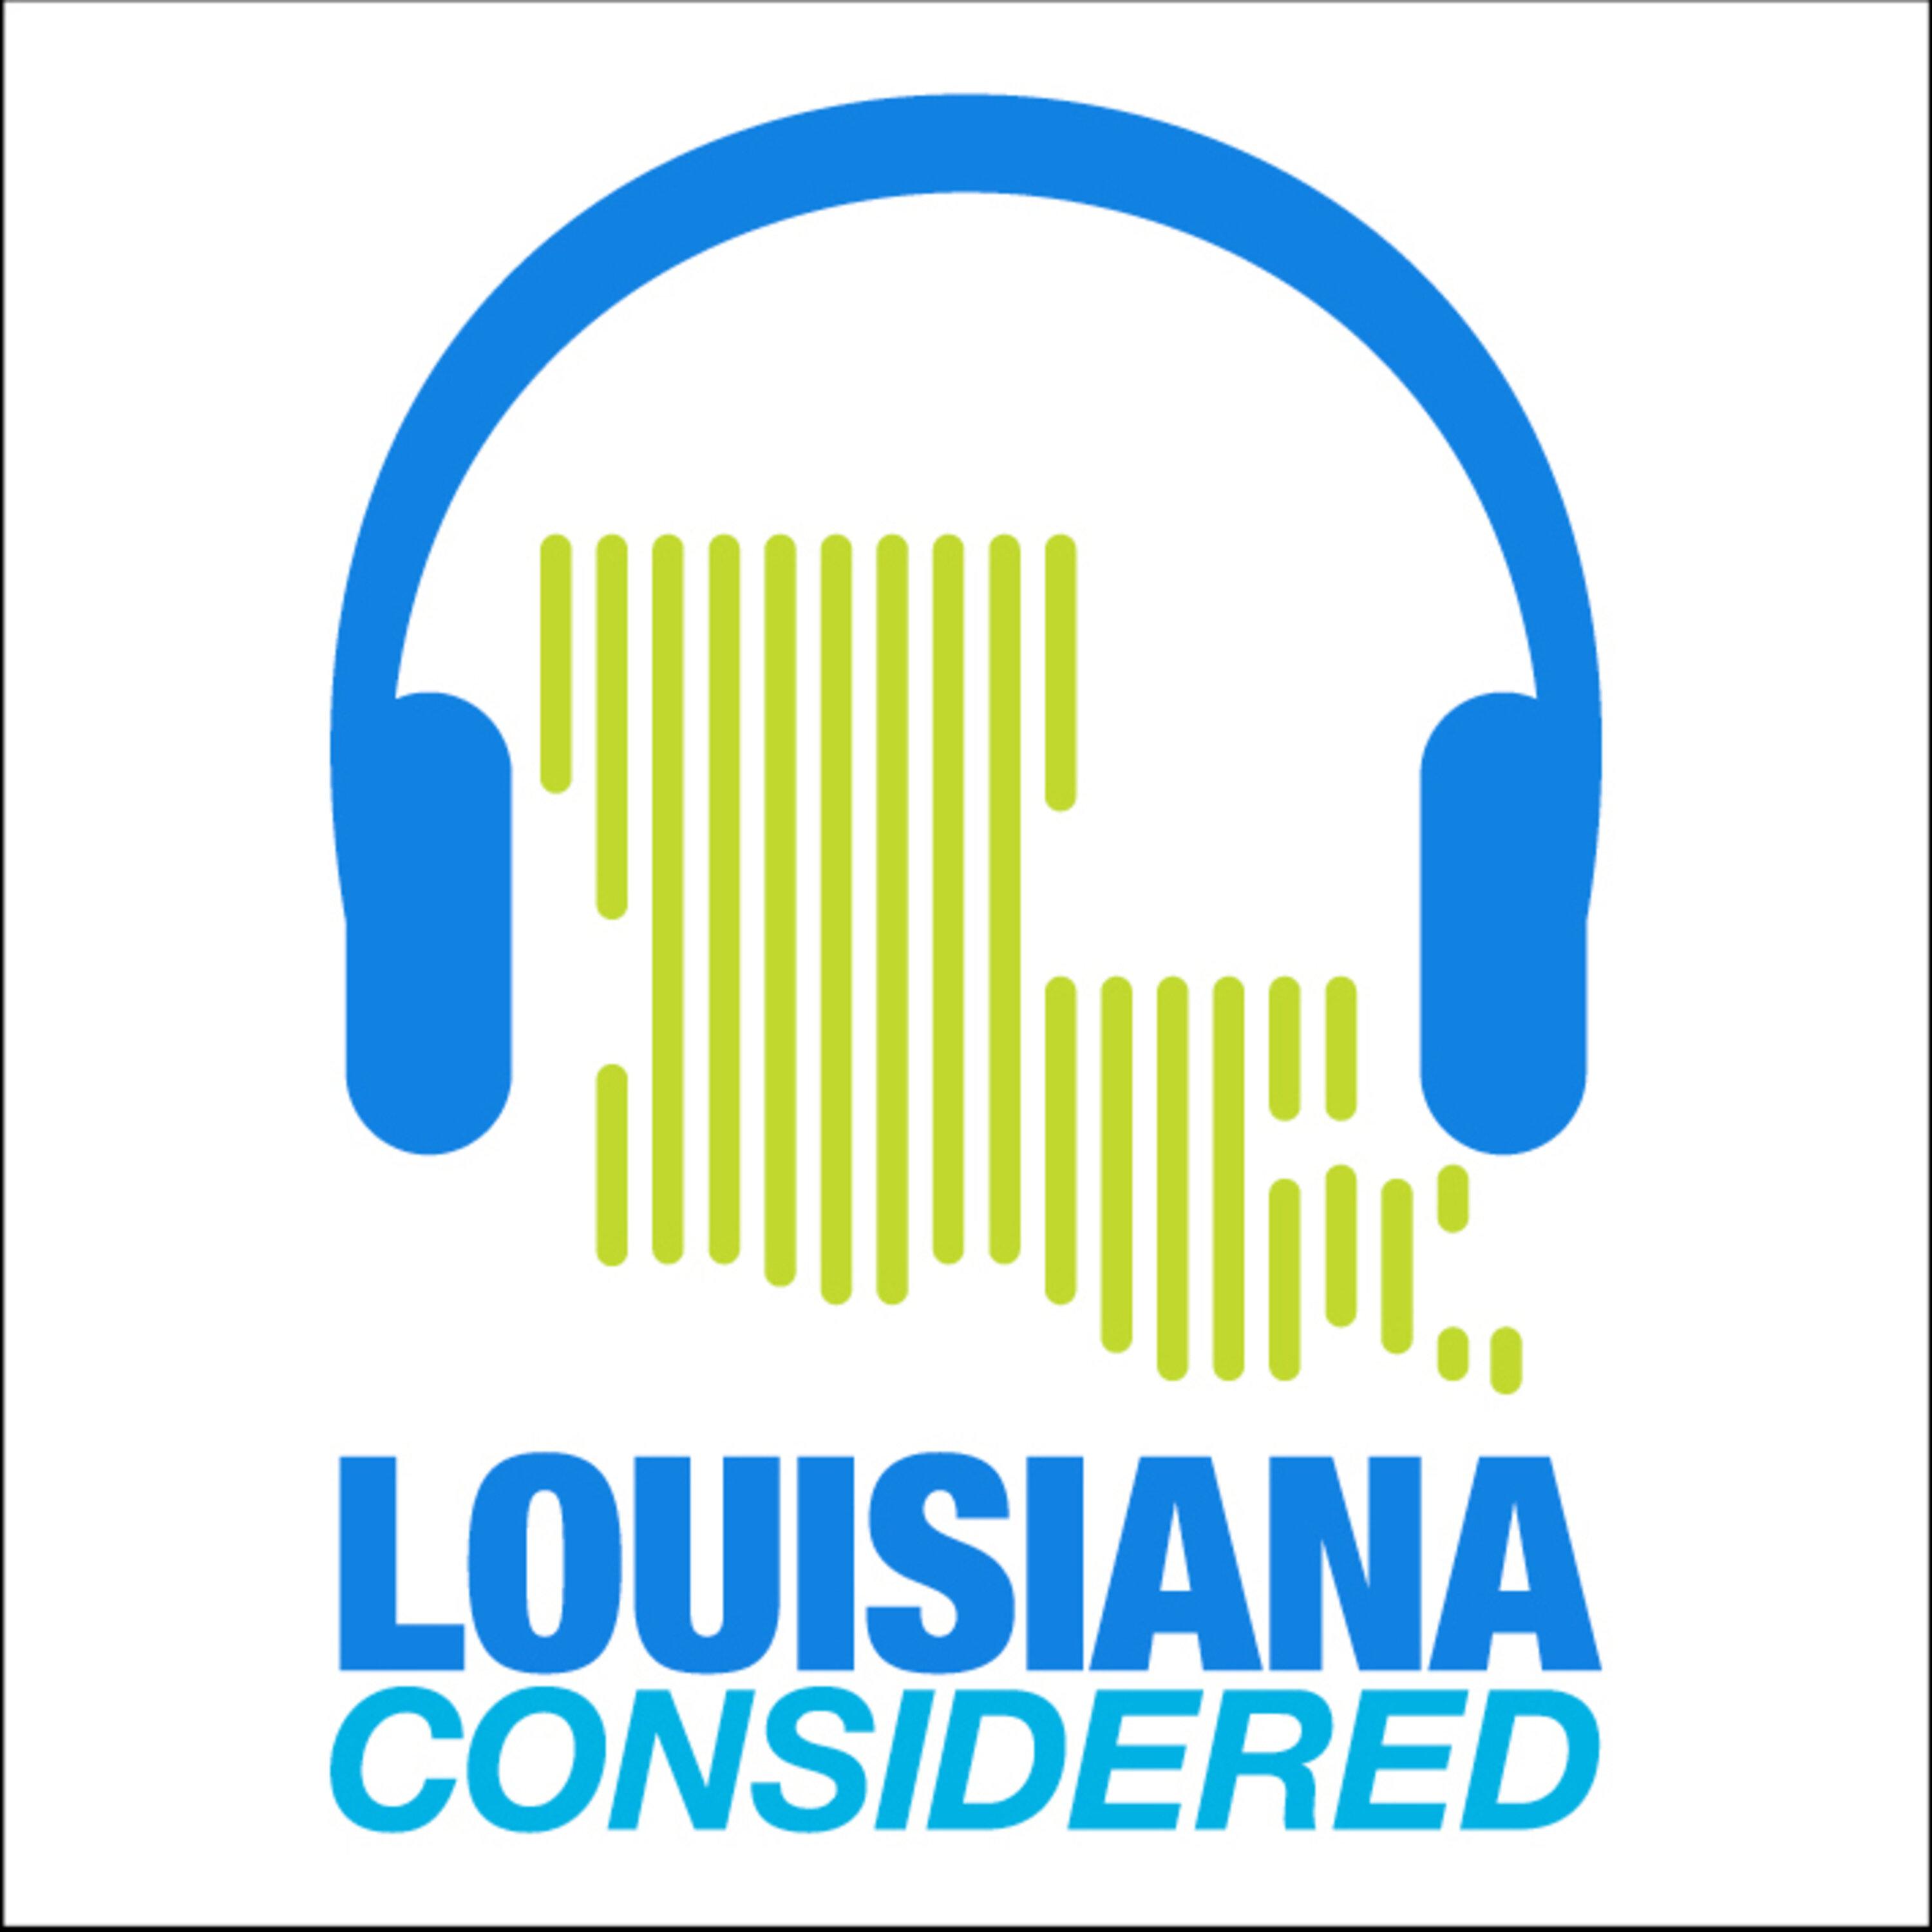 Thumbnail for "Louisiana Considered: Operation Blue Roof, New Orleans Trash Parade, Residents With Disabilities’ Pleas For Help Went Unheard During Hurricane Ida".